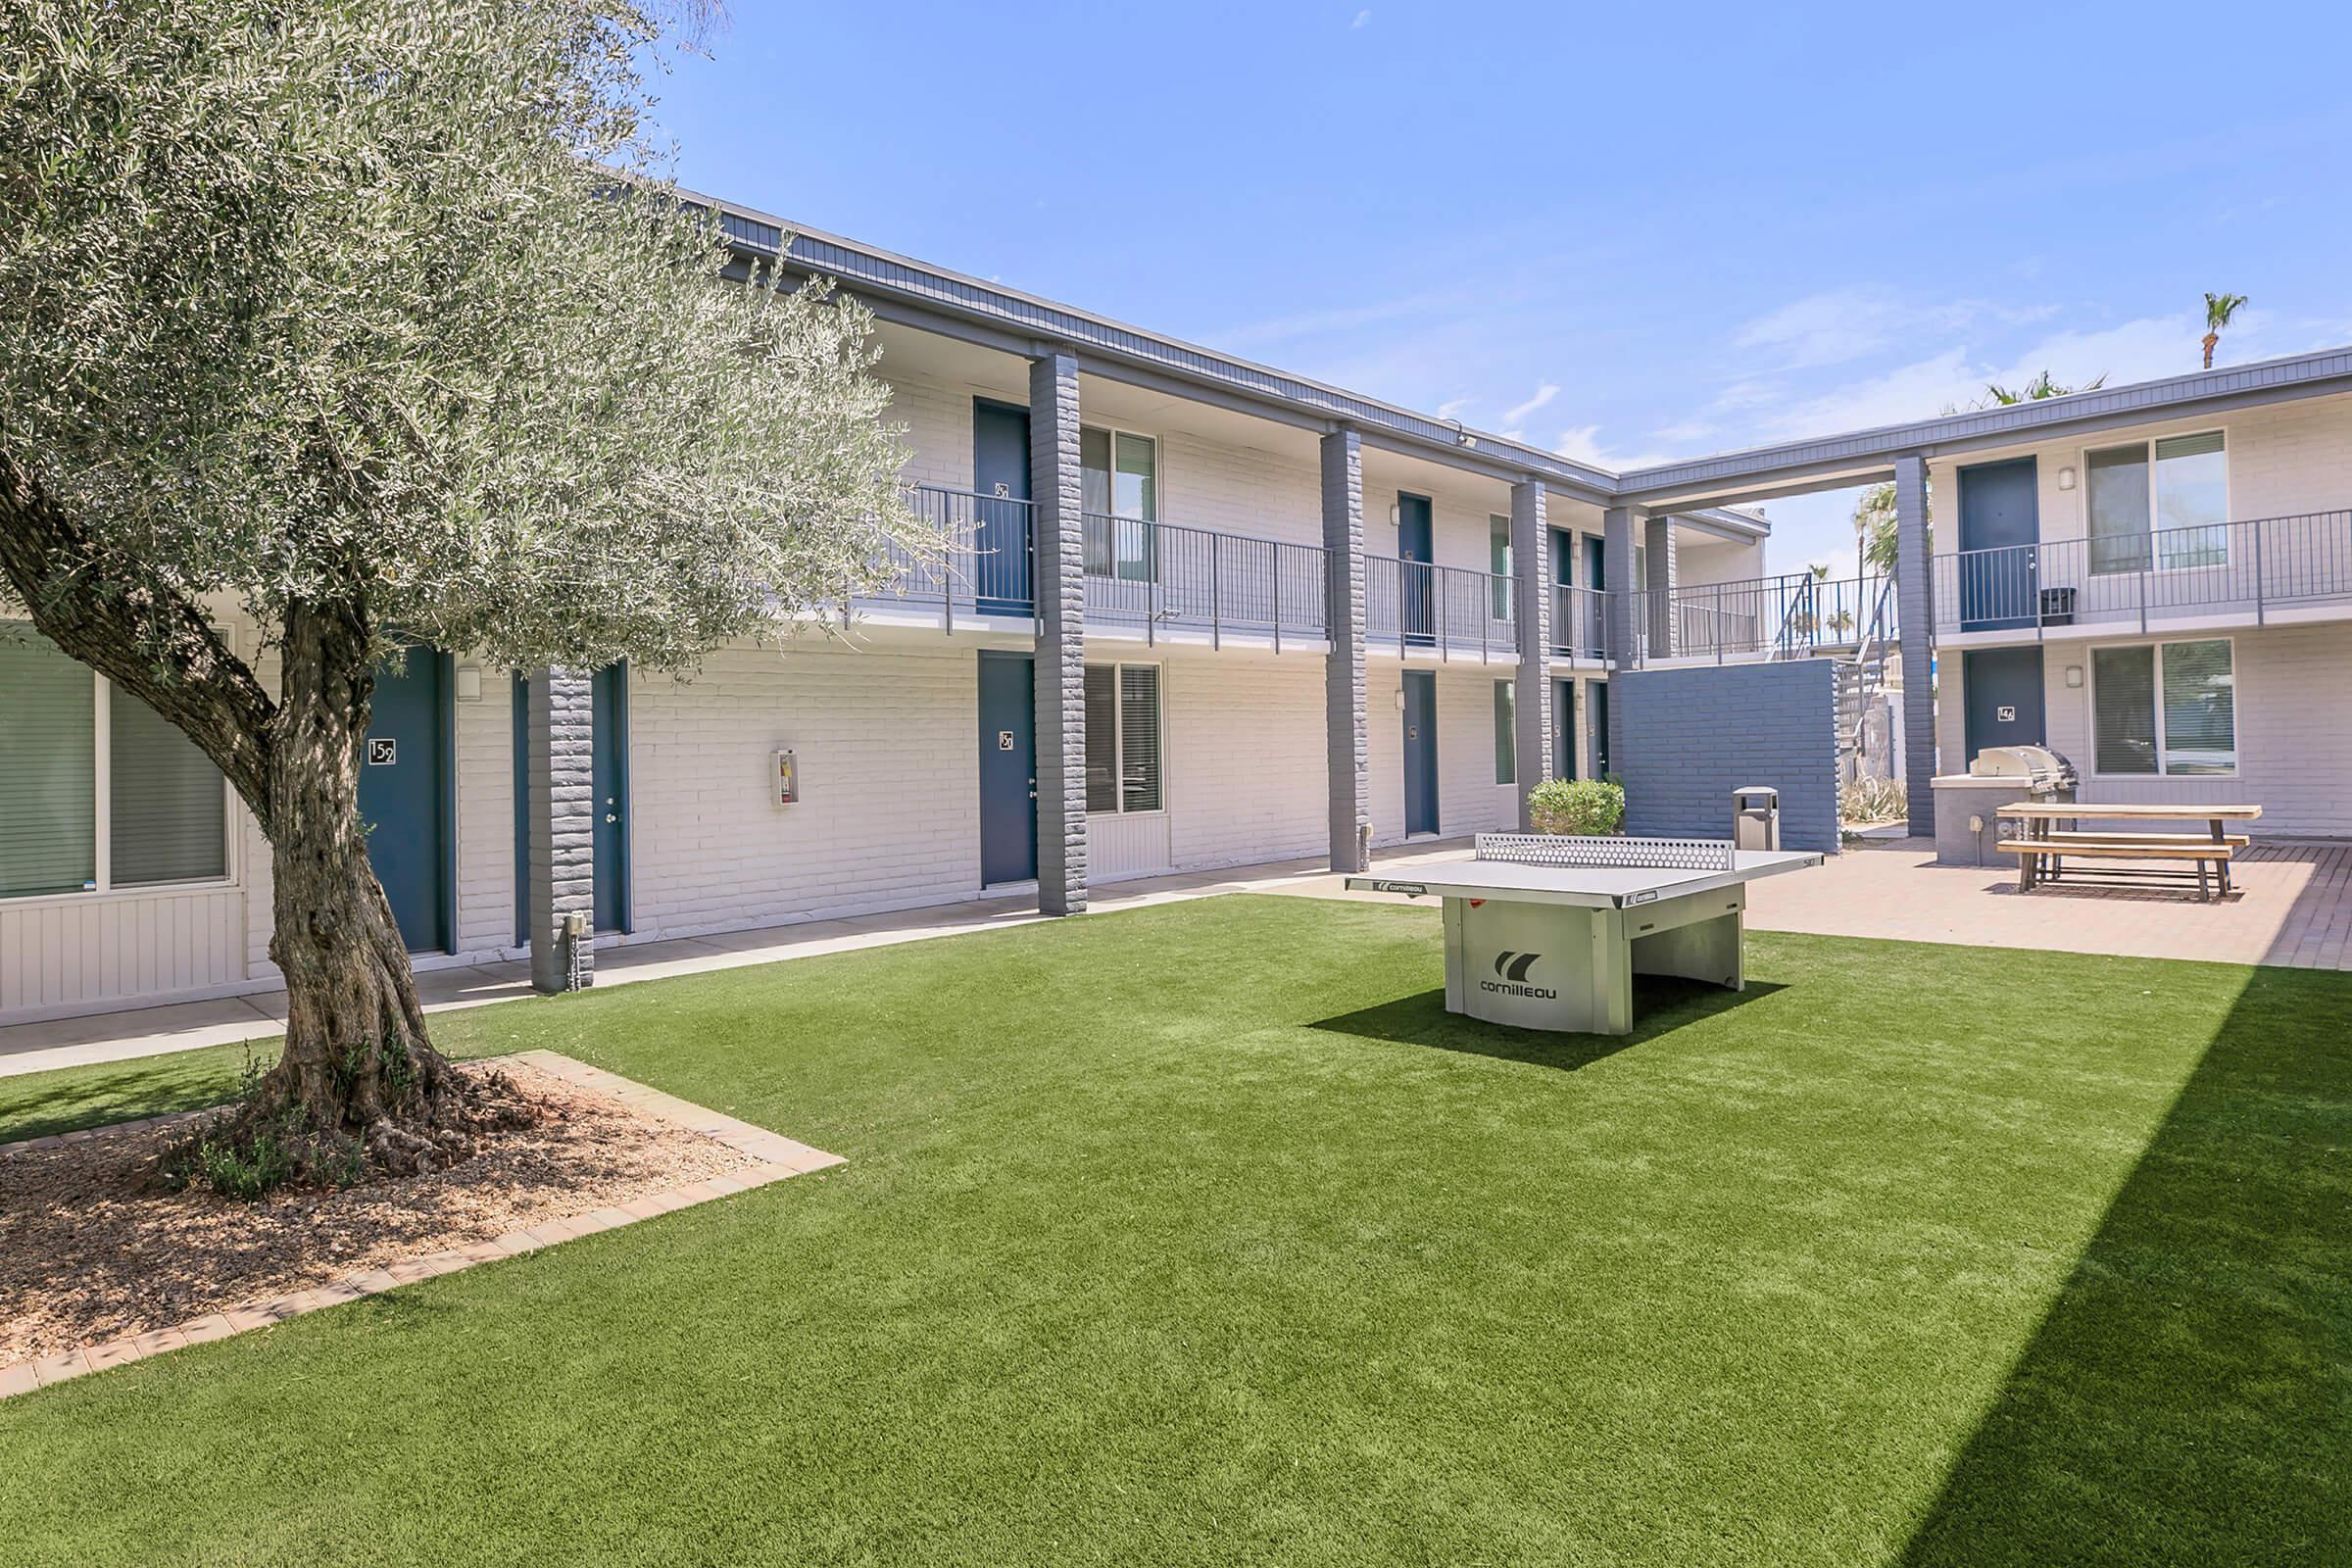 Outdoor grass area in front of a two-story Phoenix, AZ apartment building